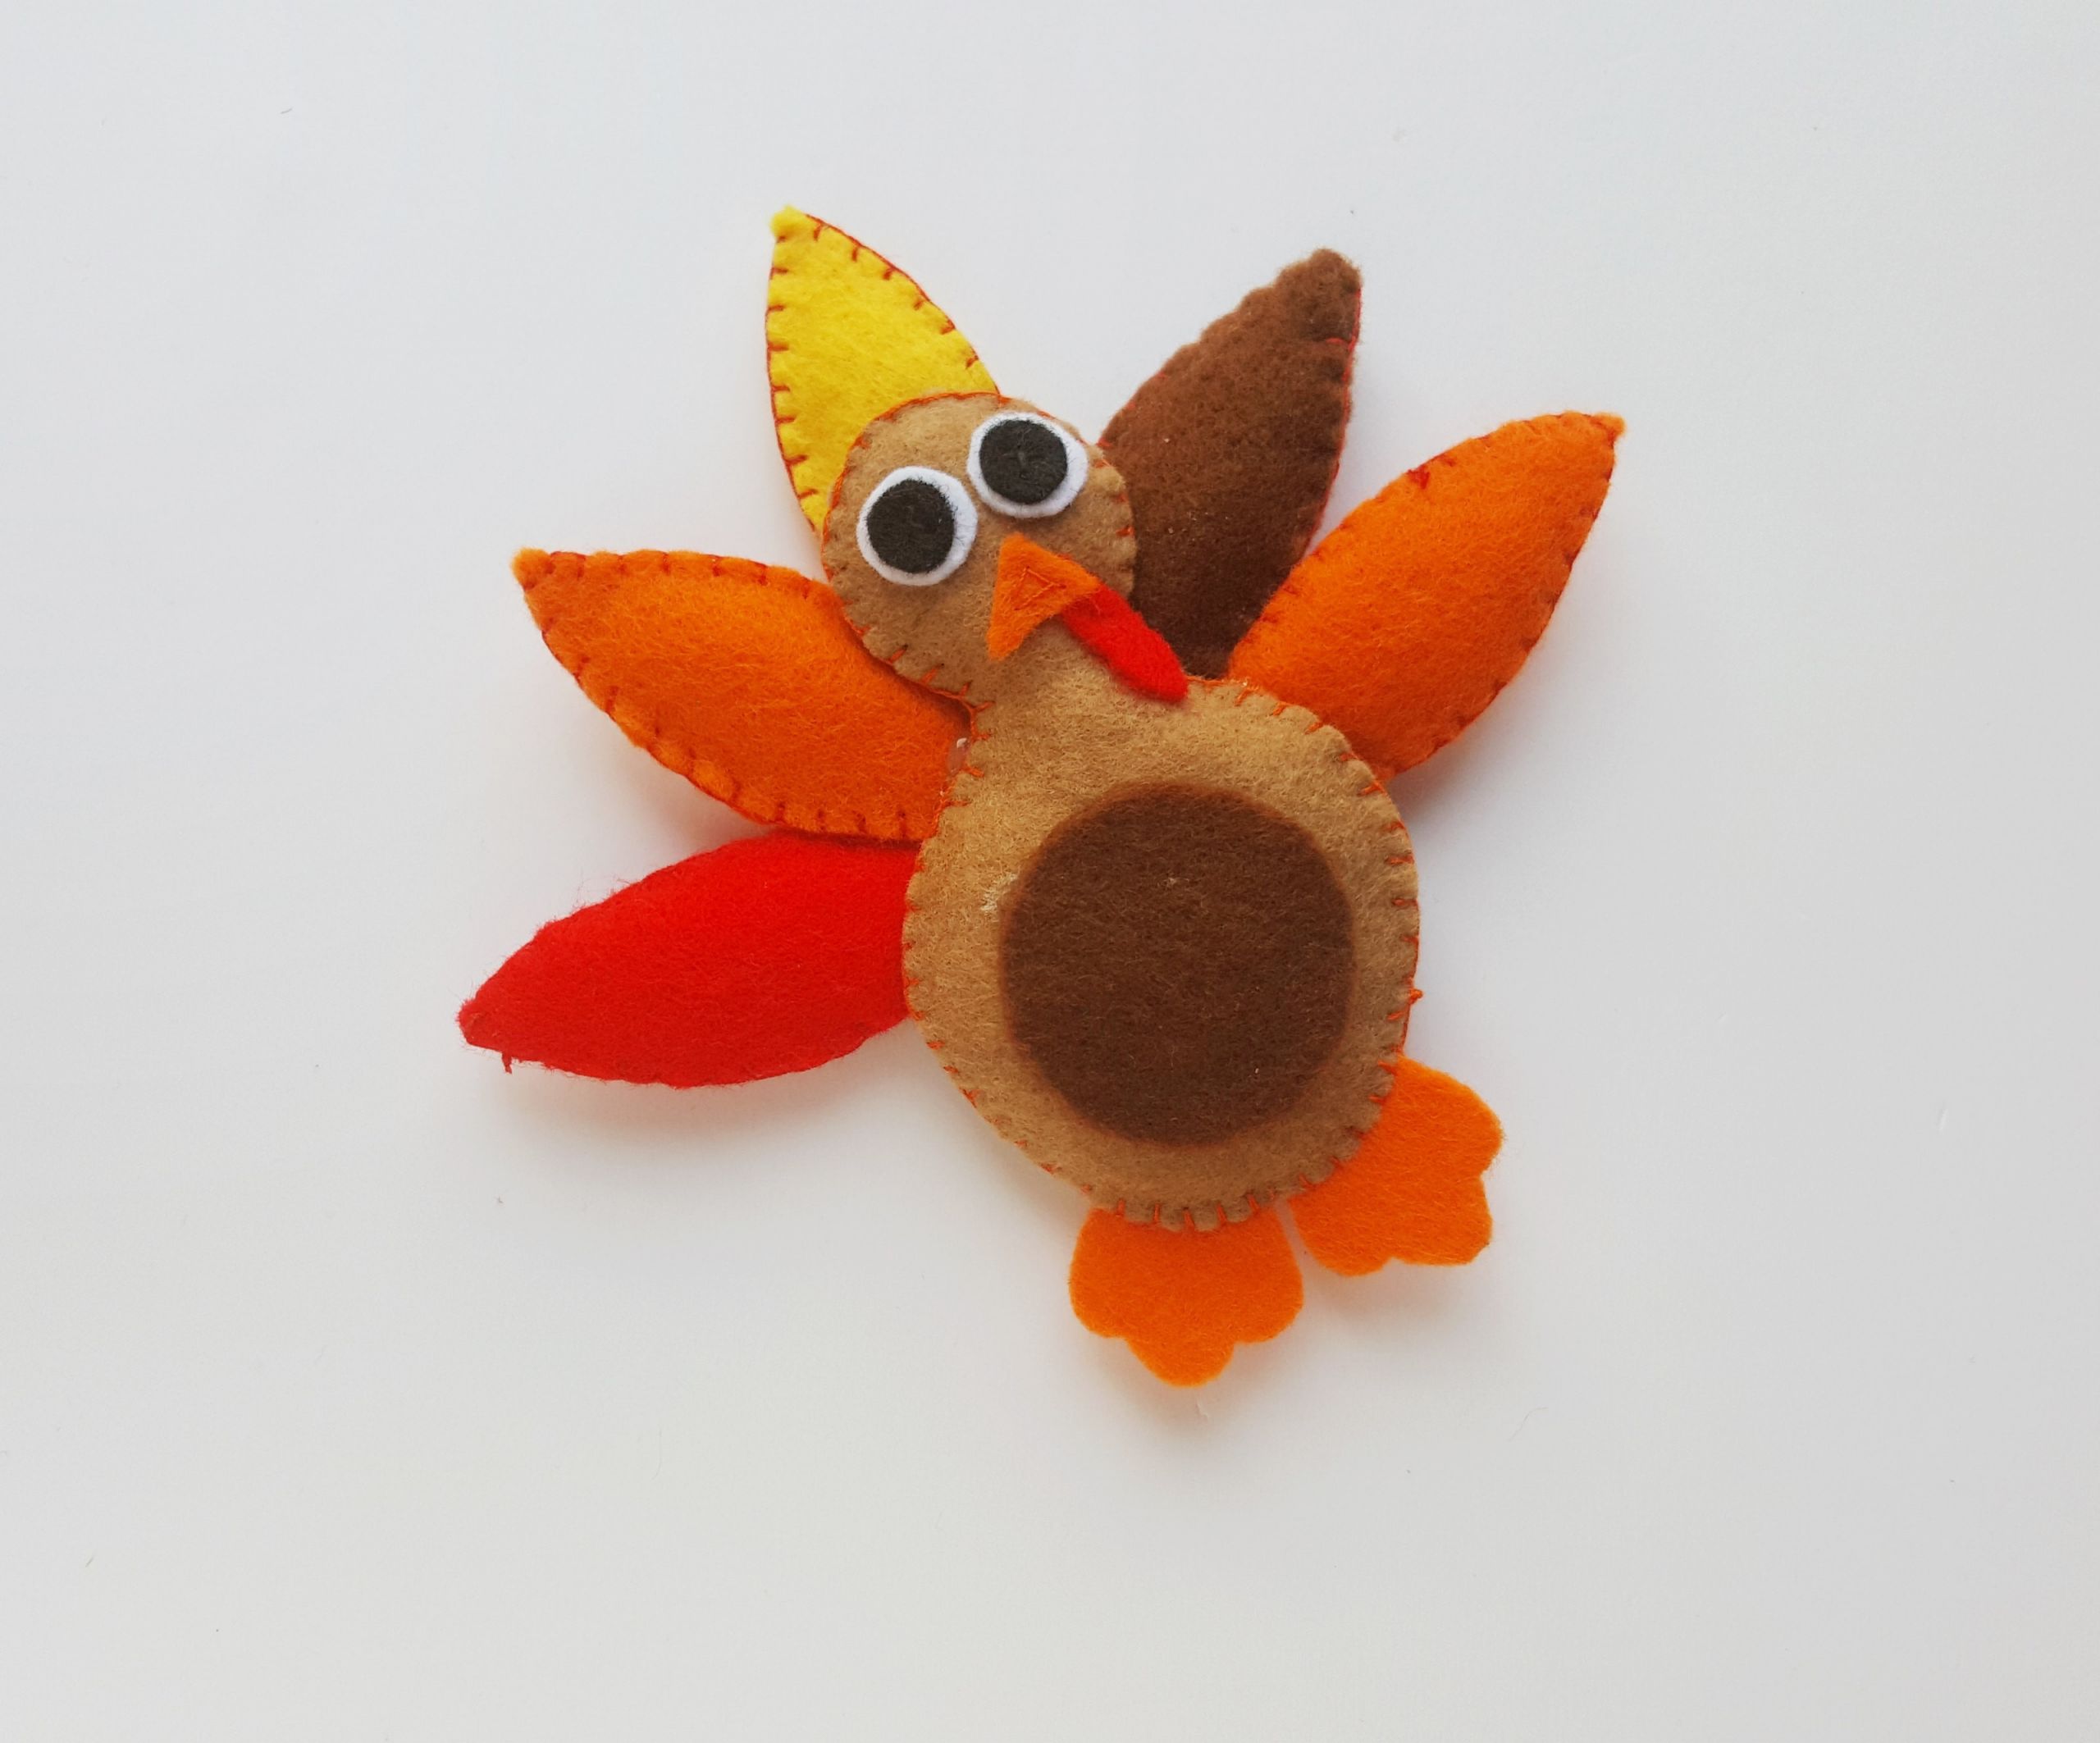 Pinterest Thanksgiving Crafts
 Thanksgiving Turkey Craft for Kids and Adults Kim and Carrie